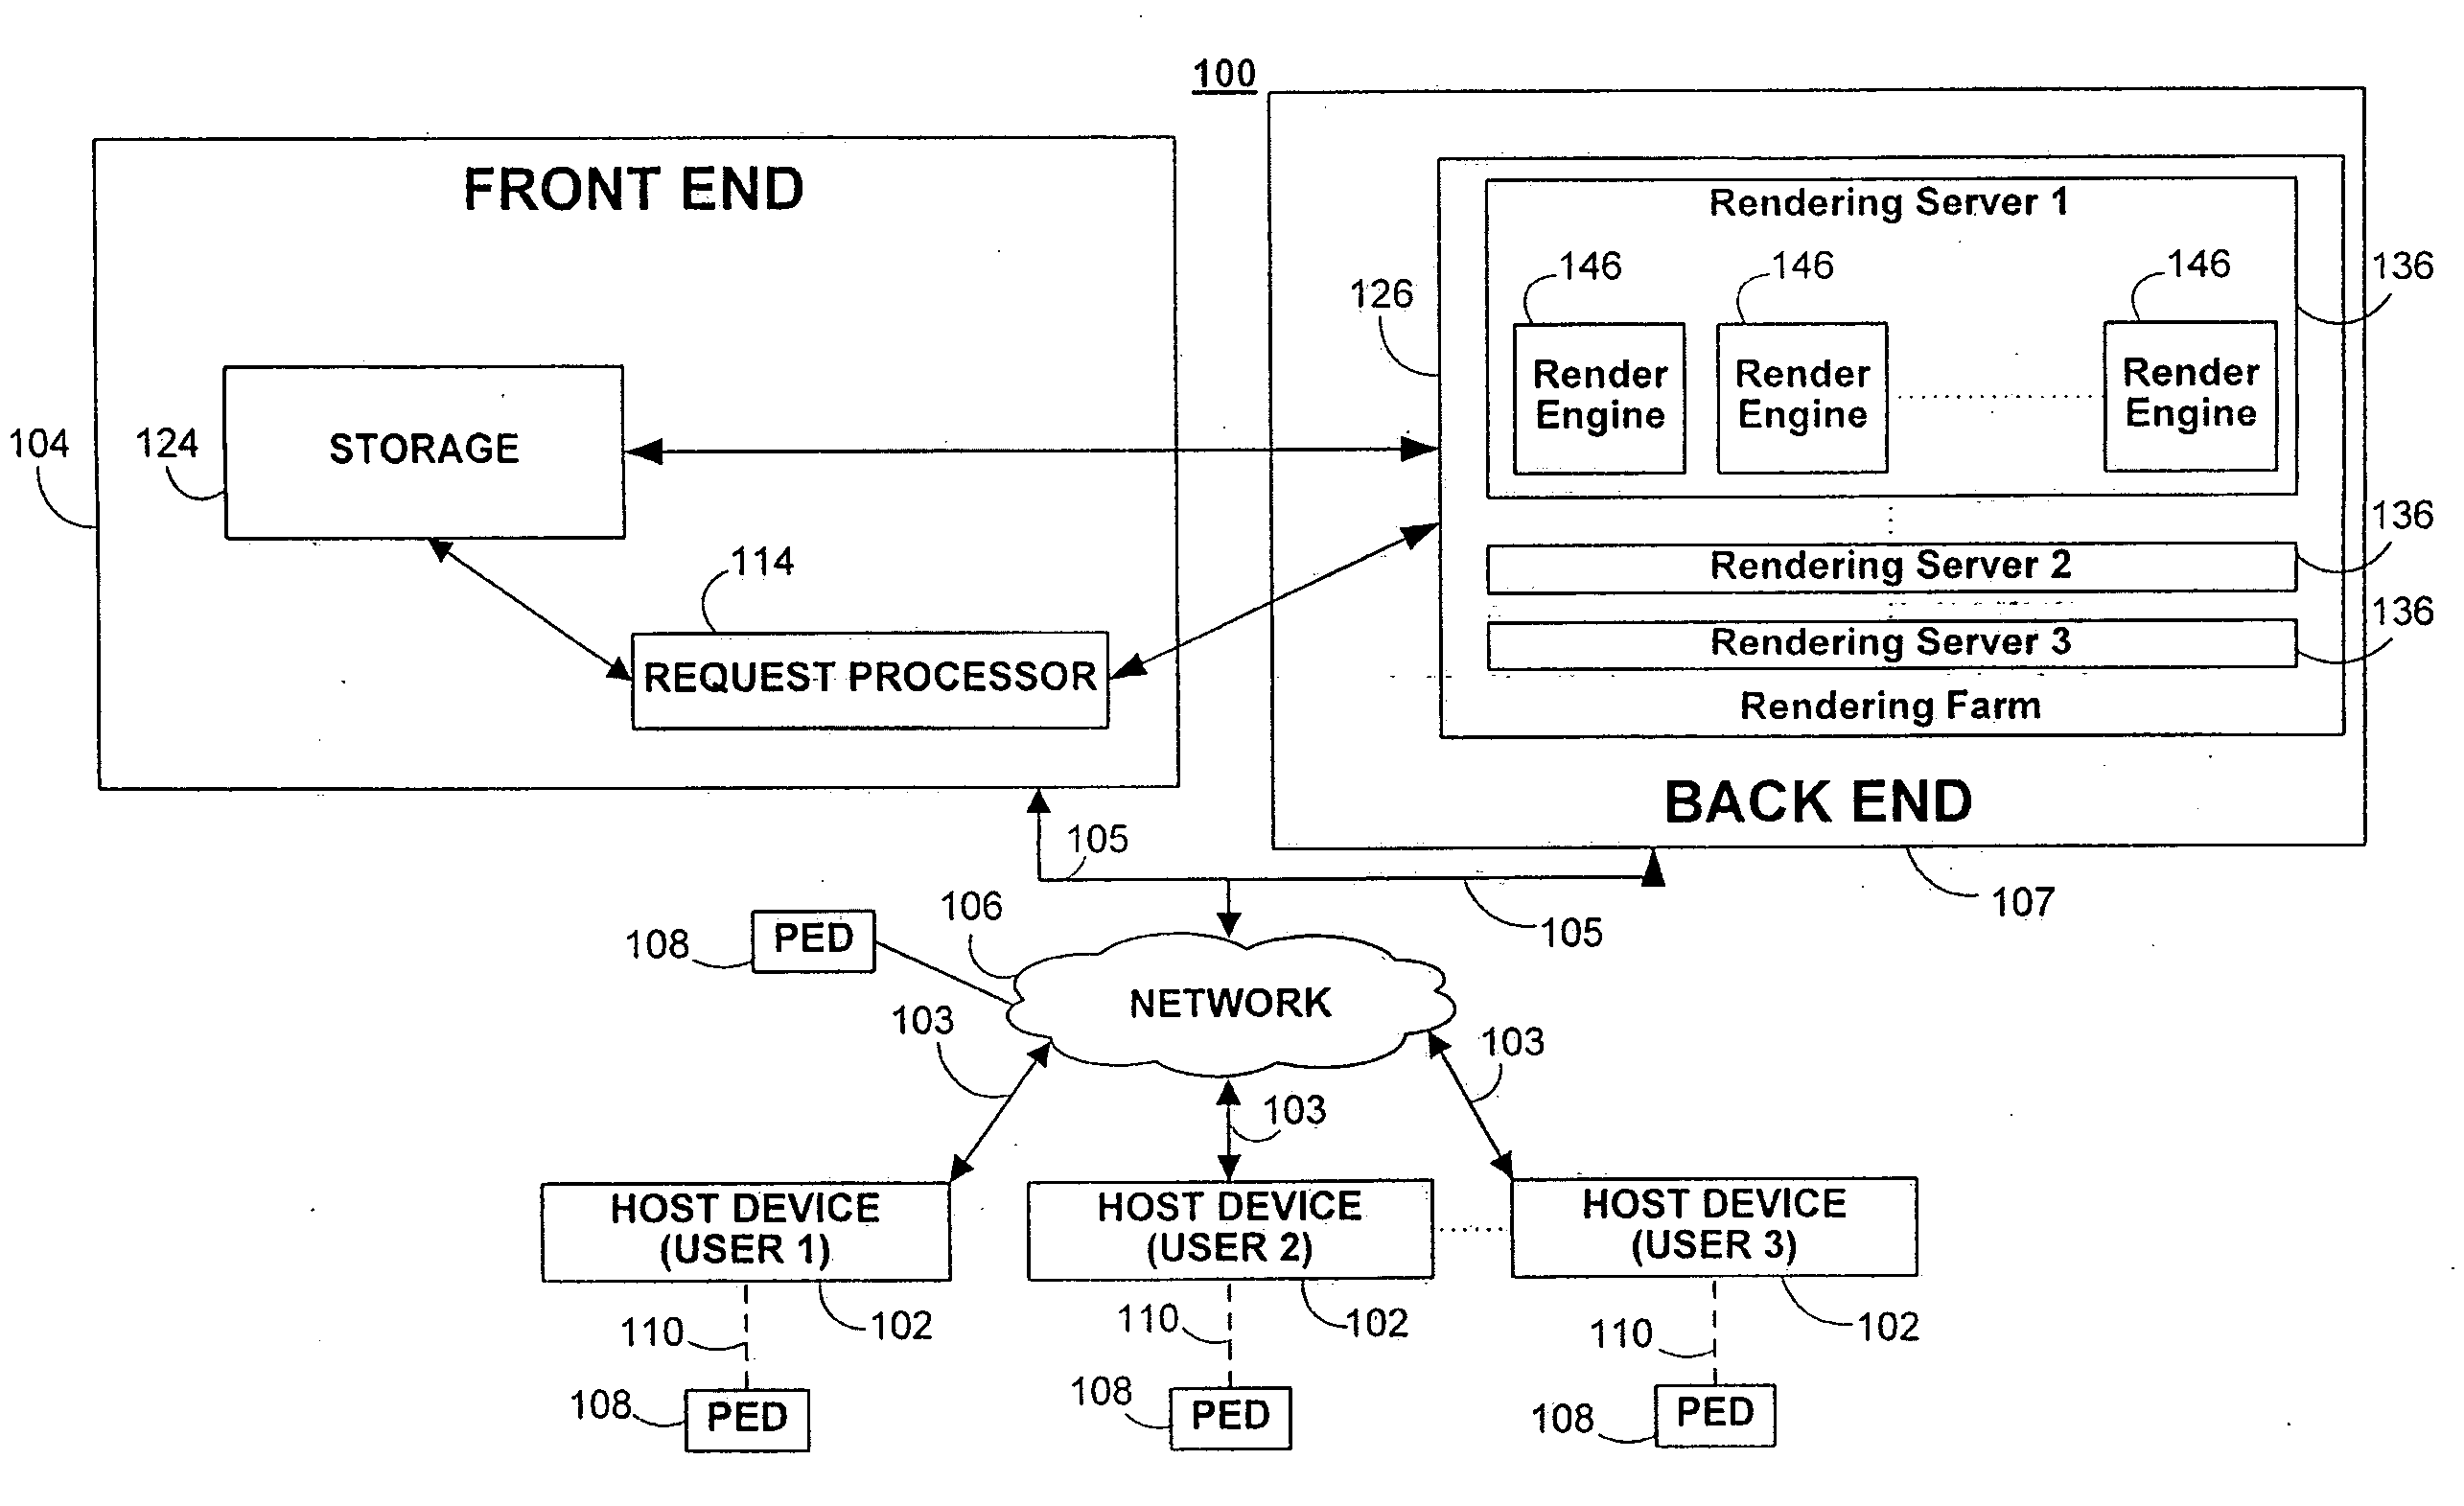 Systems and methods for selective text to speech synthesis